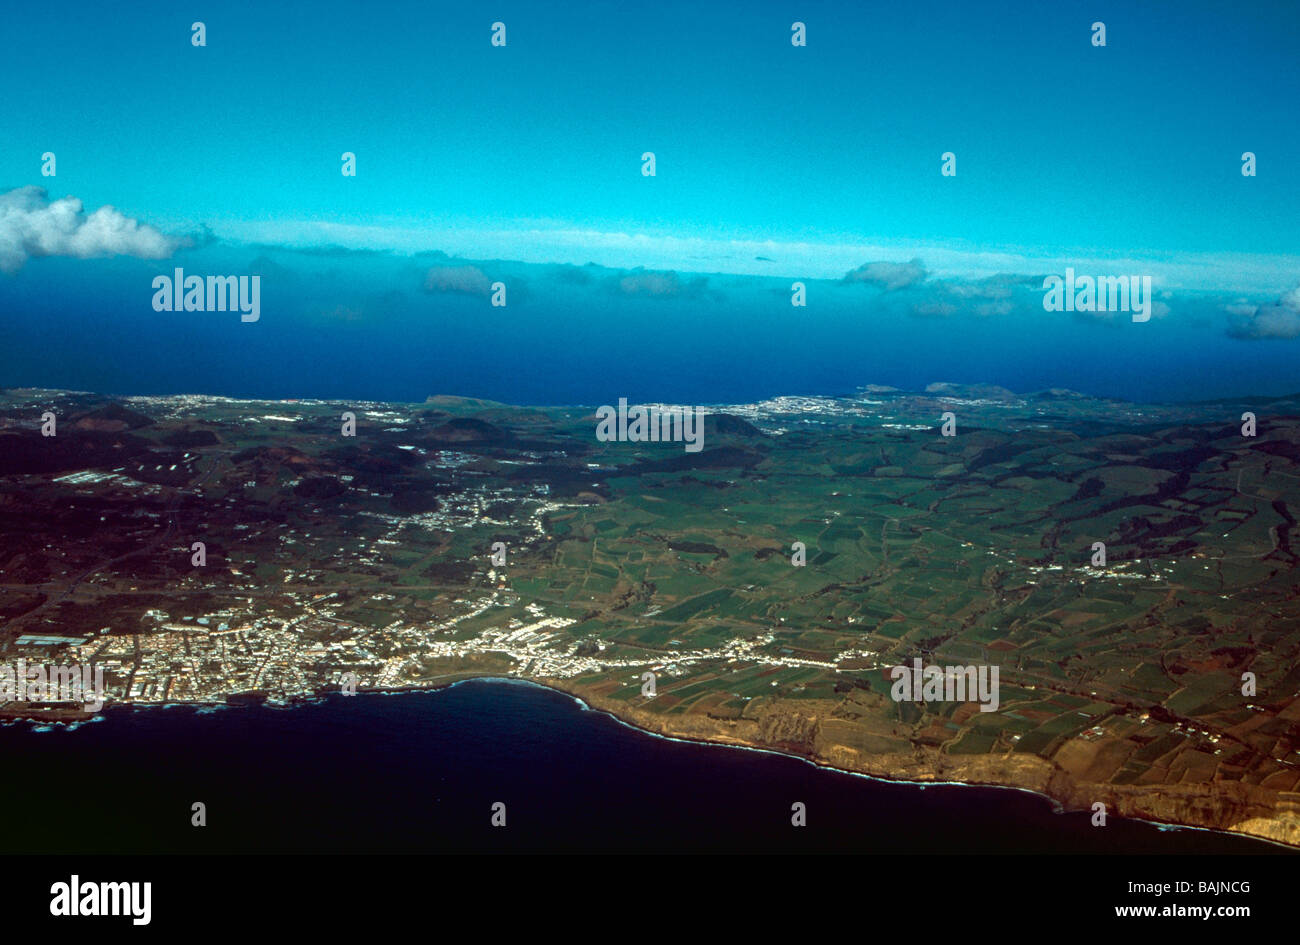 Aerial view of Sao Miguel Island, Azores, part of Portugal in the mid-Atlantic showing the capital city, Ponta Delgada Stock Photo